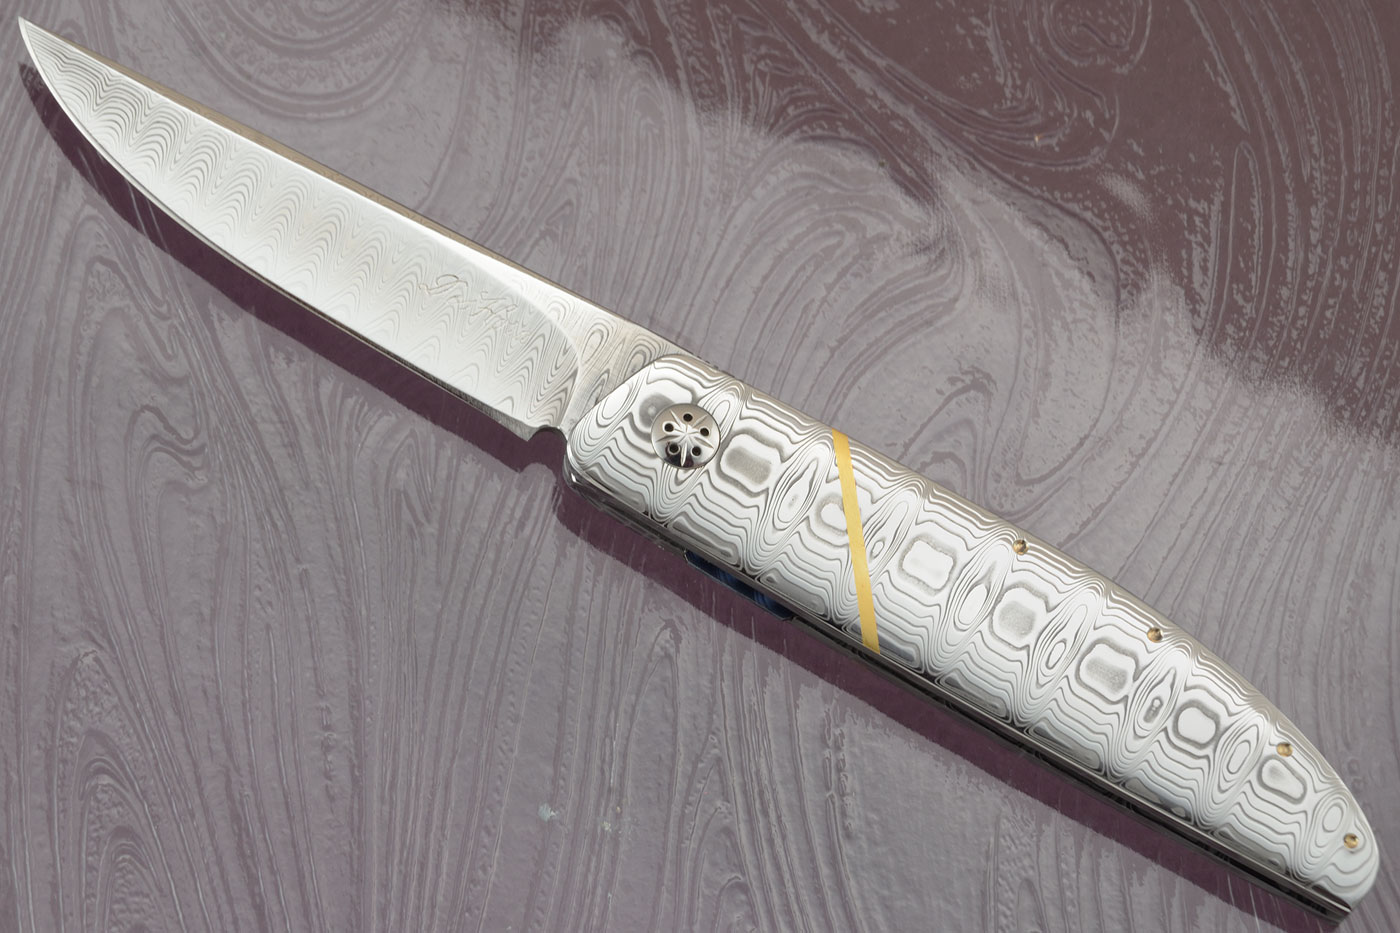 Model 450 Front Flipper with Damasteel and Gold